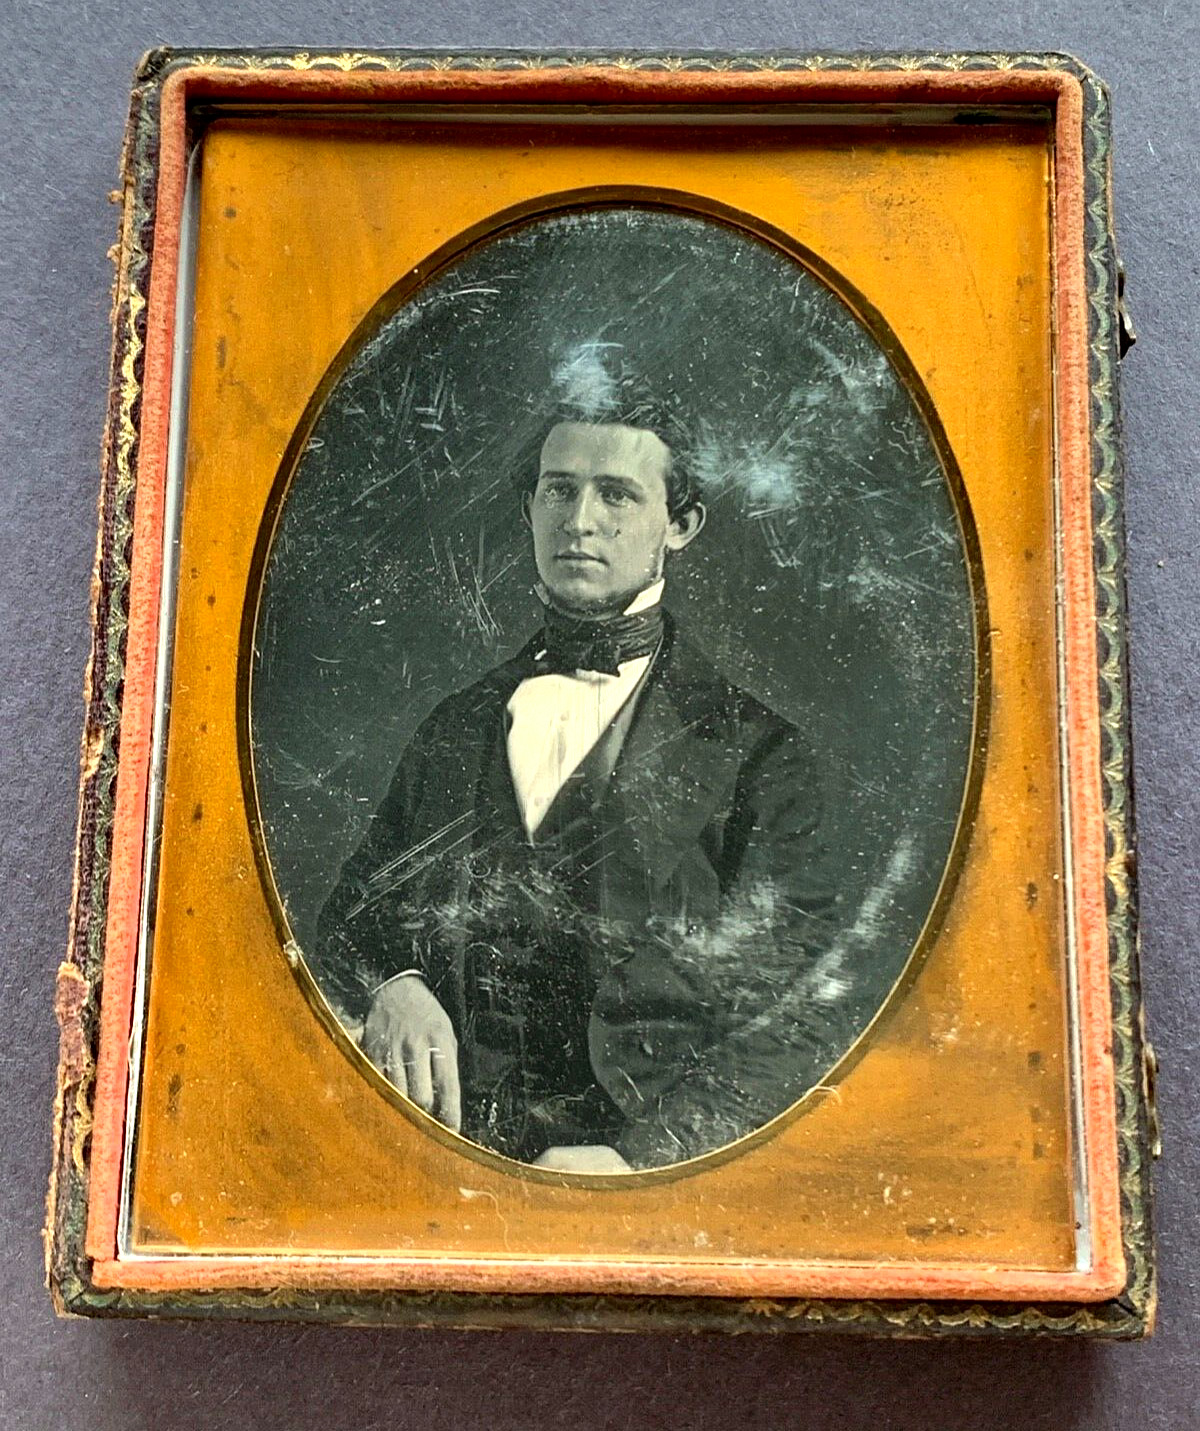 HANDSOME AS HECK Dressy Young MAN Large 1/4 Plate DAGUERREOTYPE Photo c 1850s